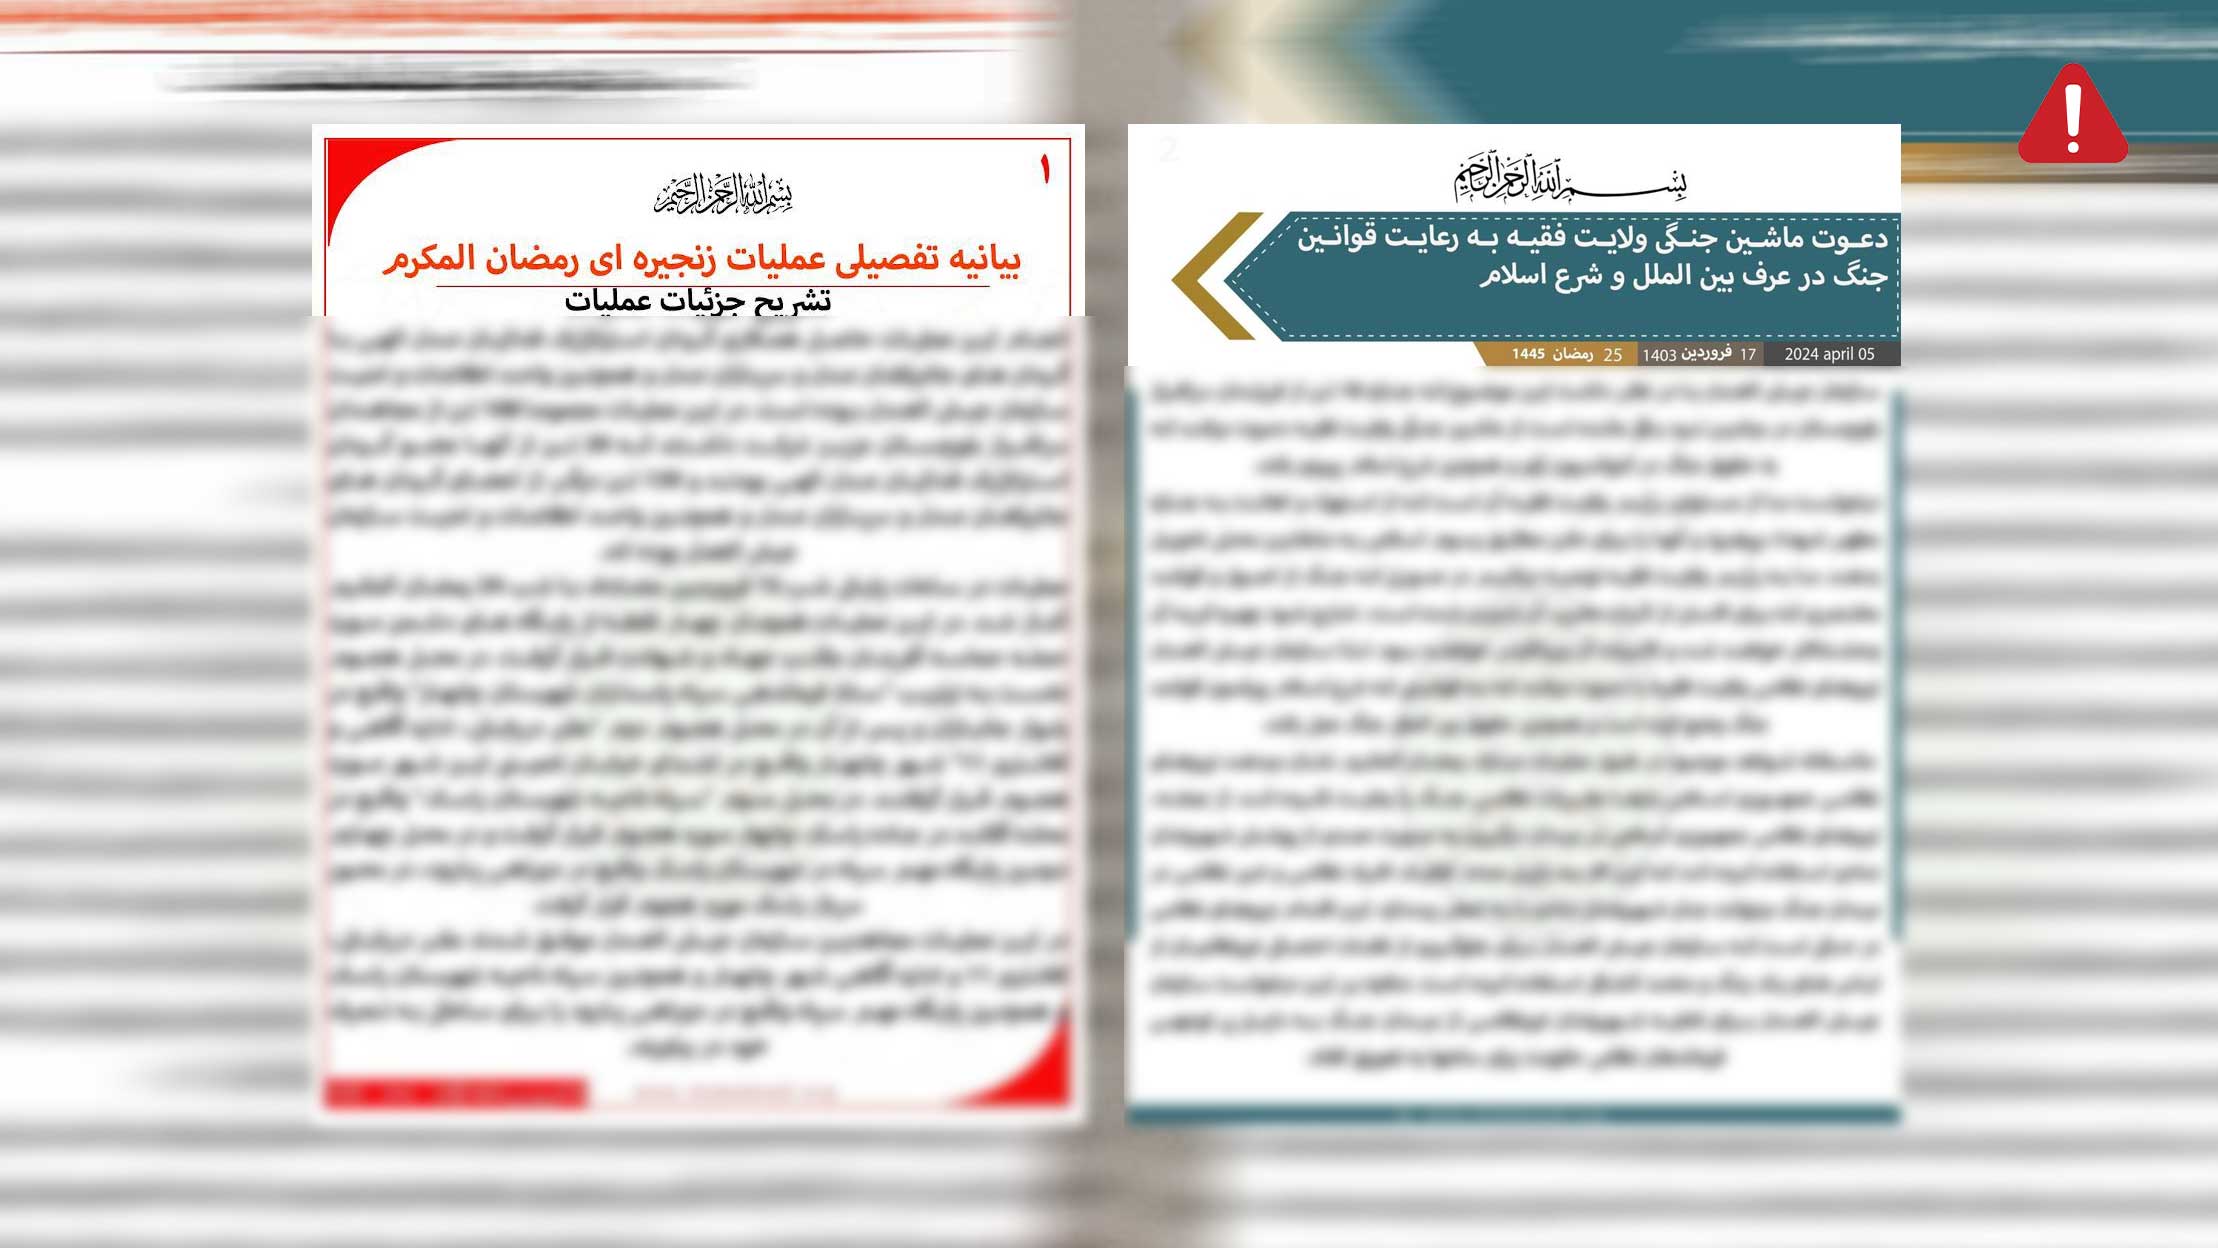 TKD MONITORING: Jaish ul Adl Releases Detailed Statements on its April 4 Operations and Threaten New Attacks image